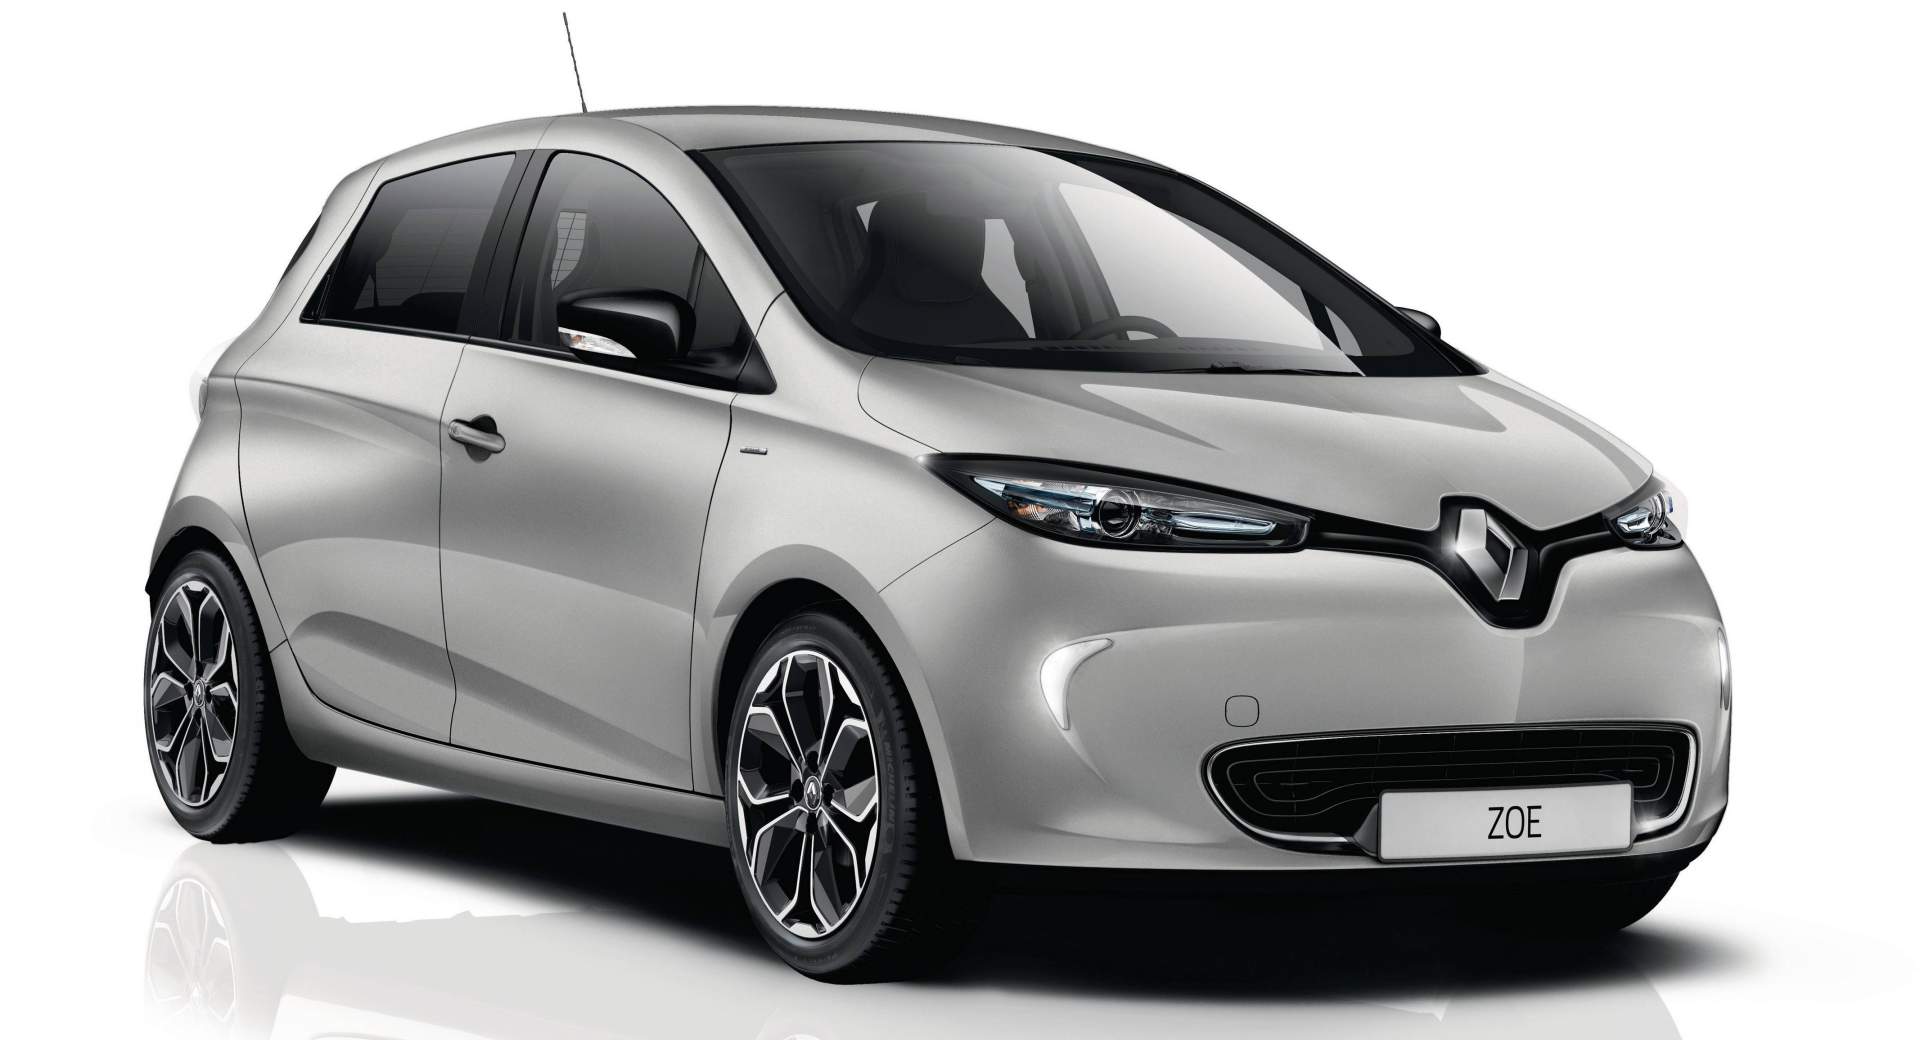 https://www.carscoops.com/wp-content/uploads/2018/10/899aa6b7-renault-zoe-iconic-edition-0.jpg